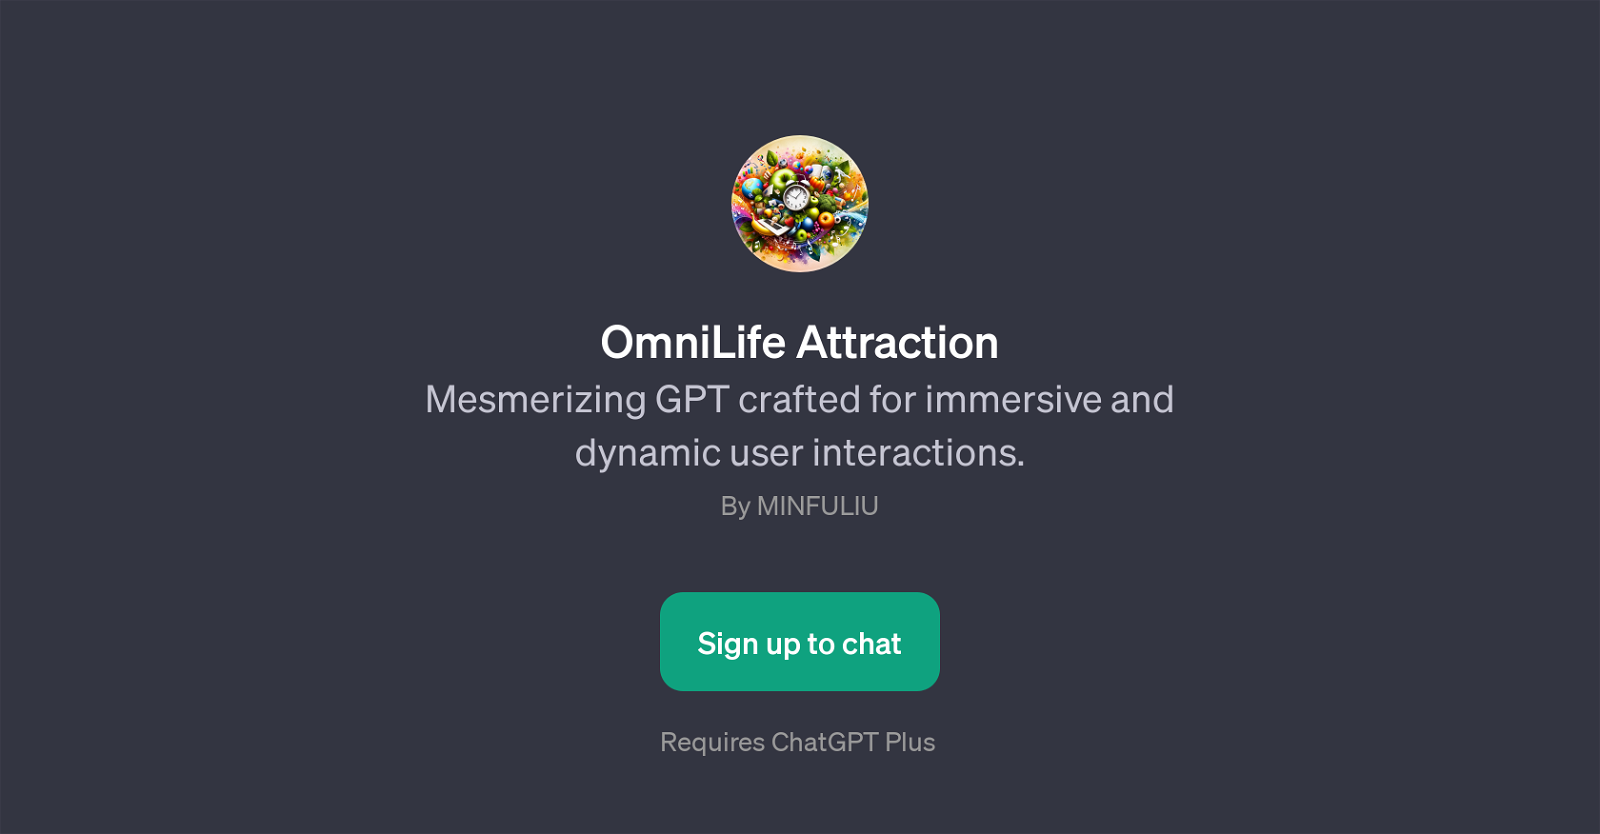 OmniLife Attraction website